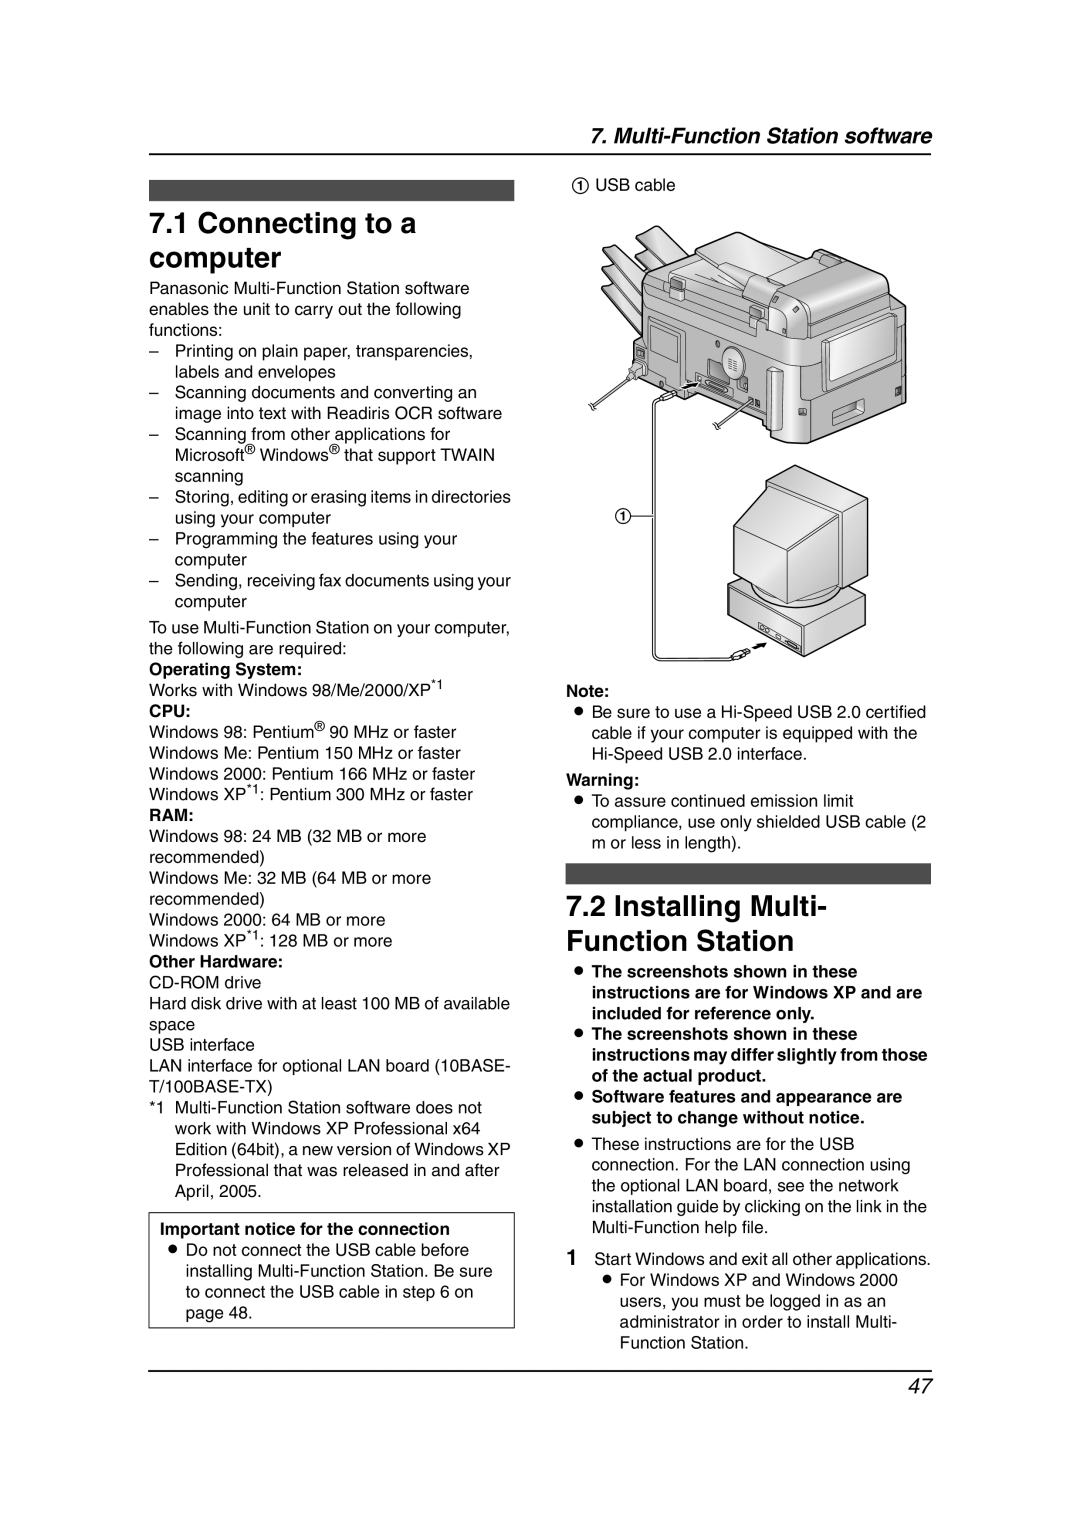 Panasonic KX-FLB851 manual Connecting to a computer, Installing Multi- Function Station, Multi-Function Station software 